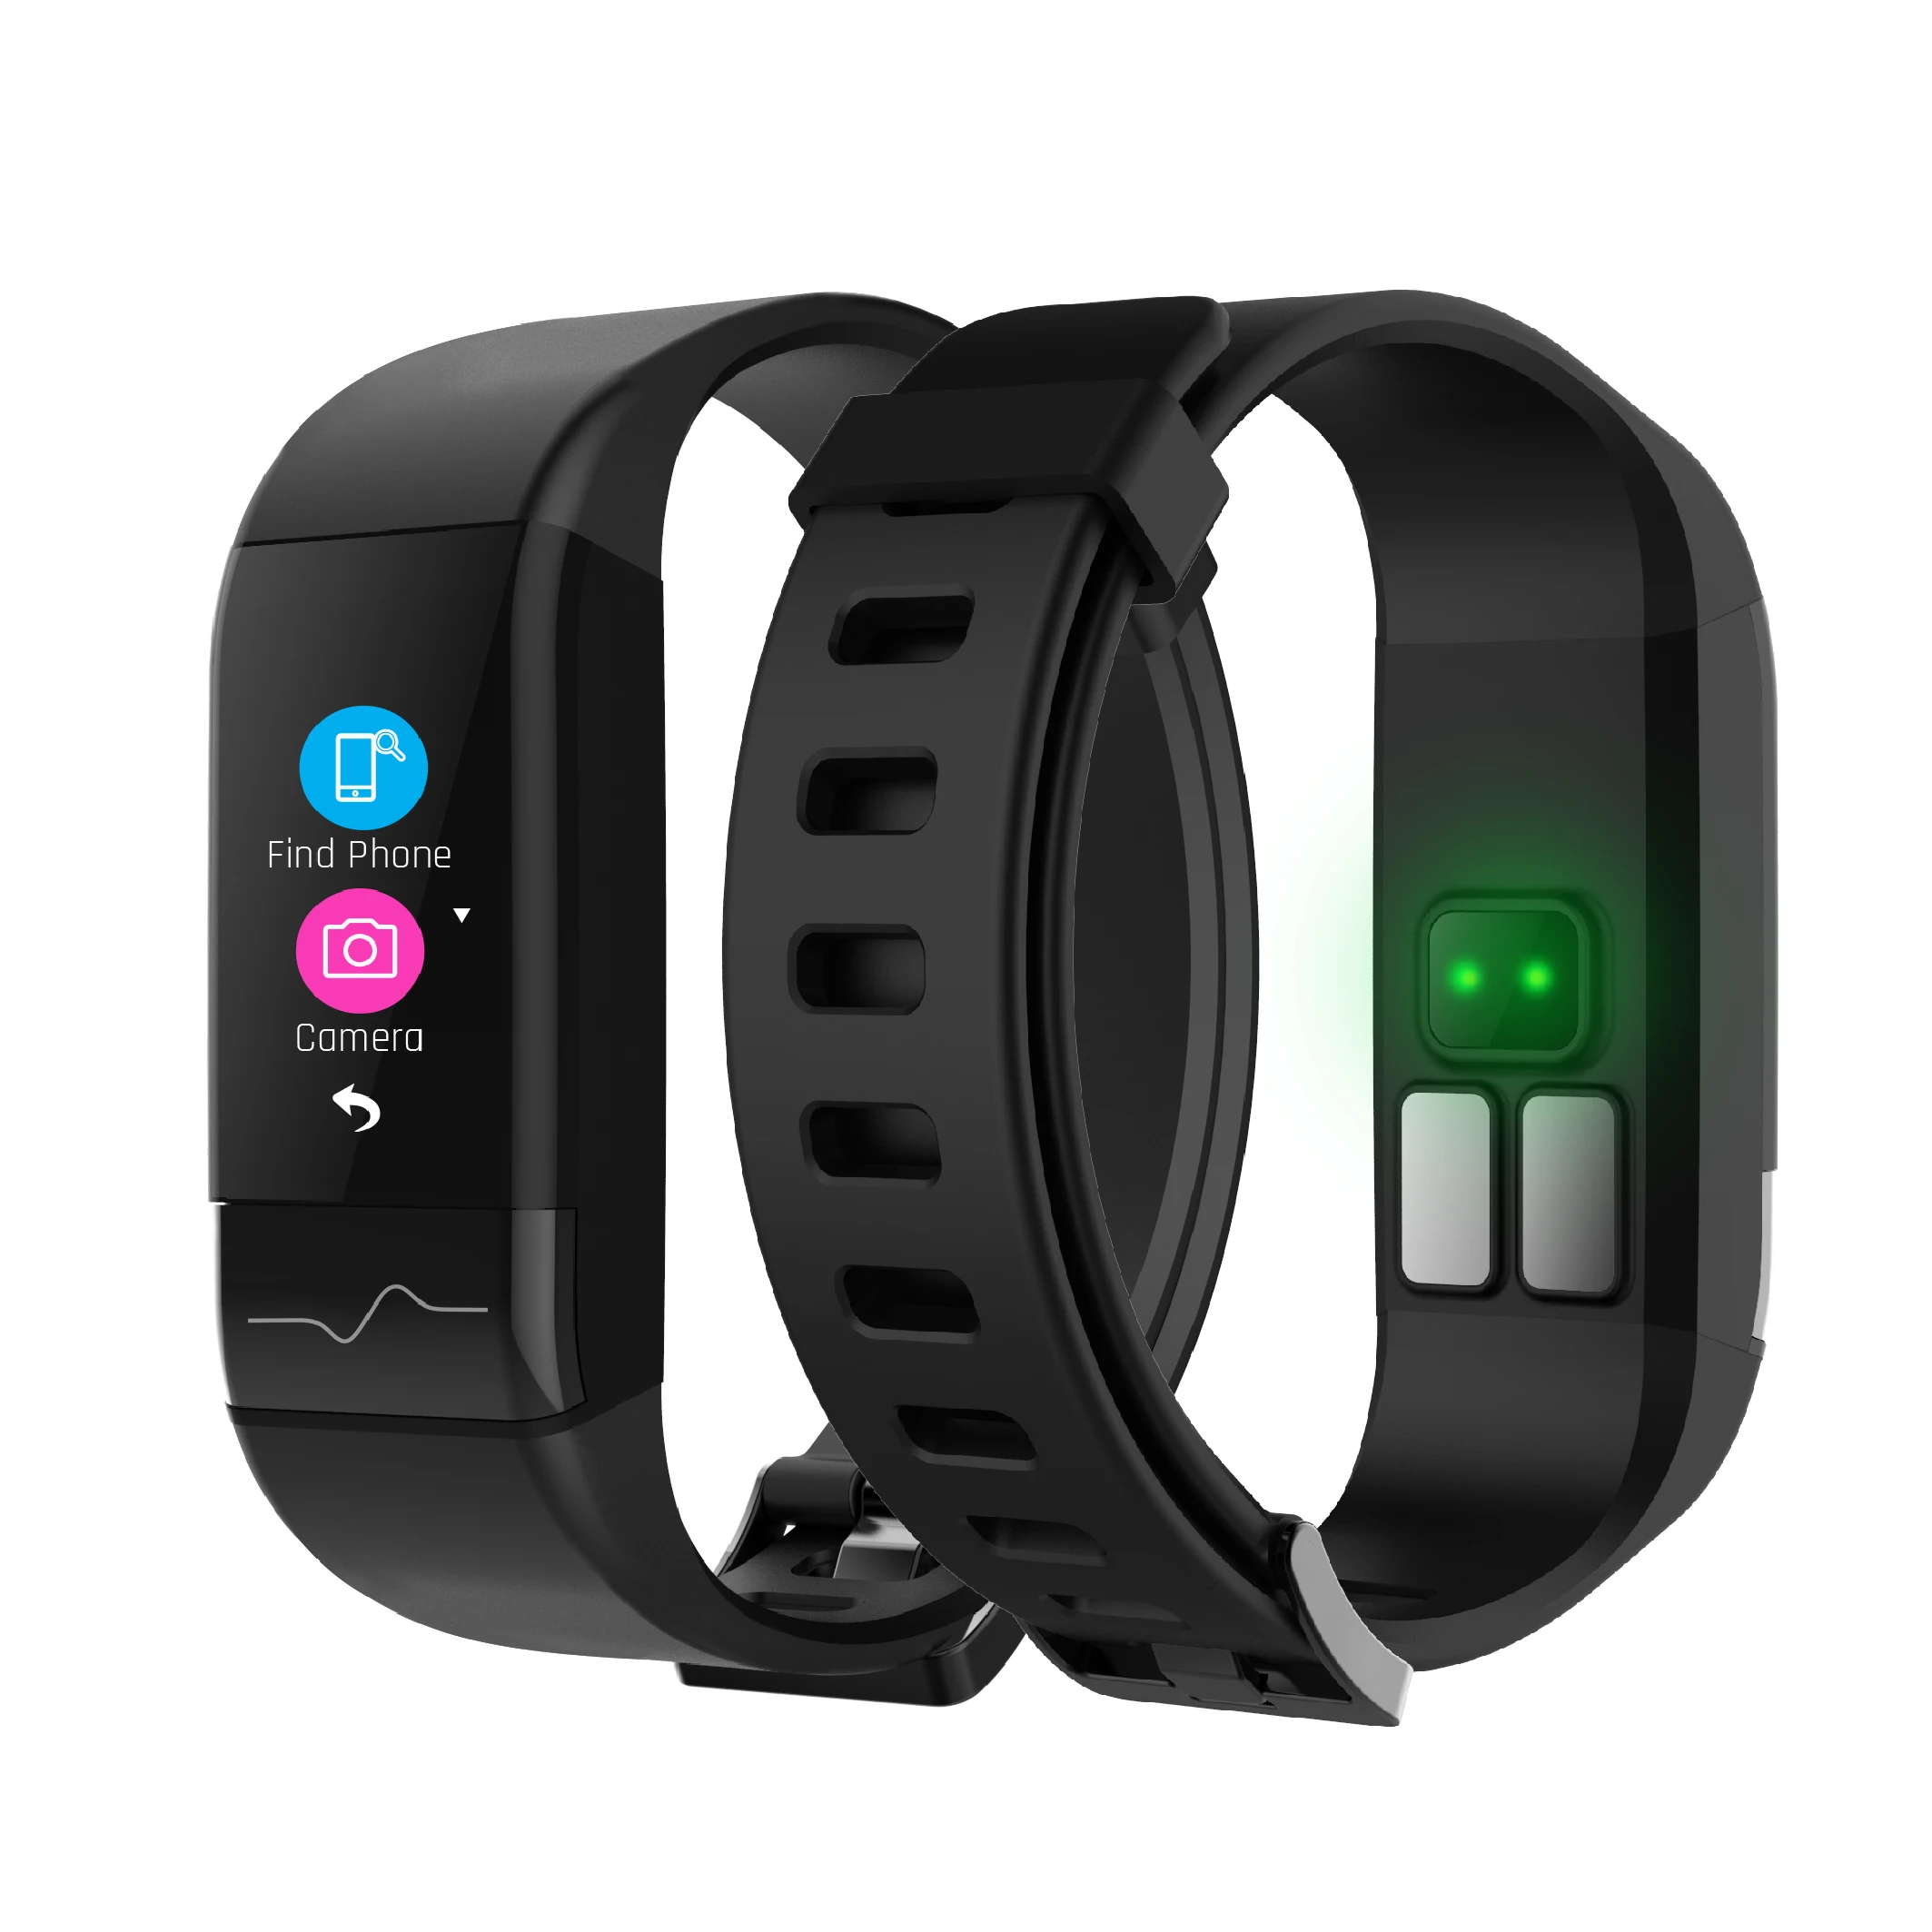 

SDK & API Fitness Tracker Watch Smart Band ECG and PPG Blood Pressure Monitor, Black, blue, red or oem color